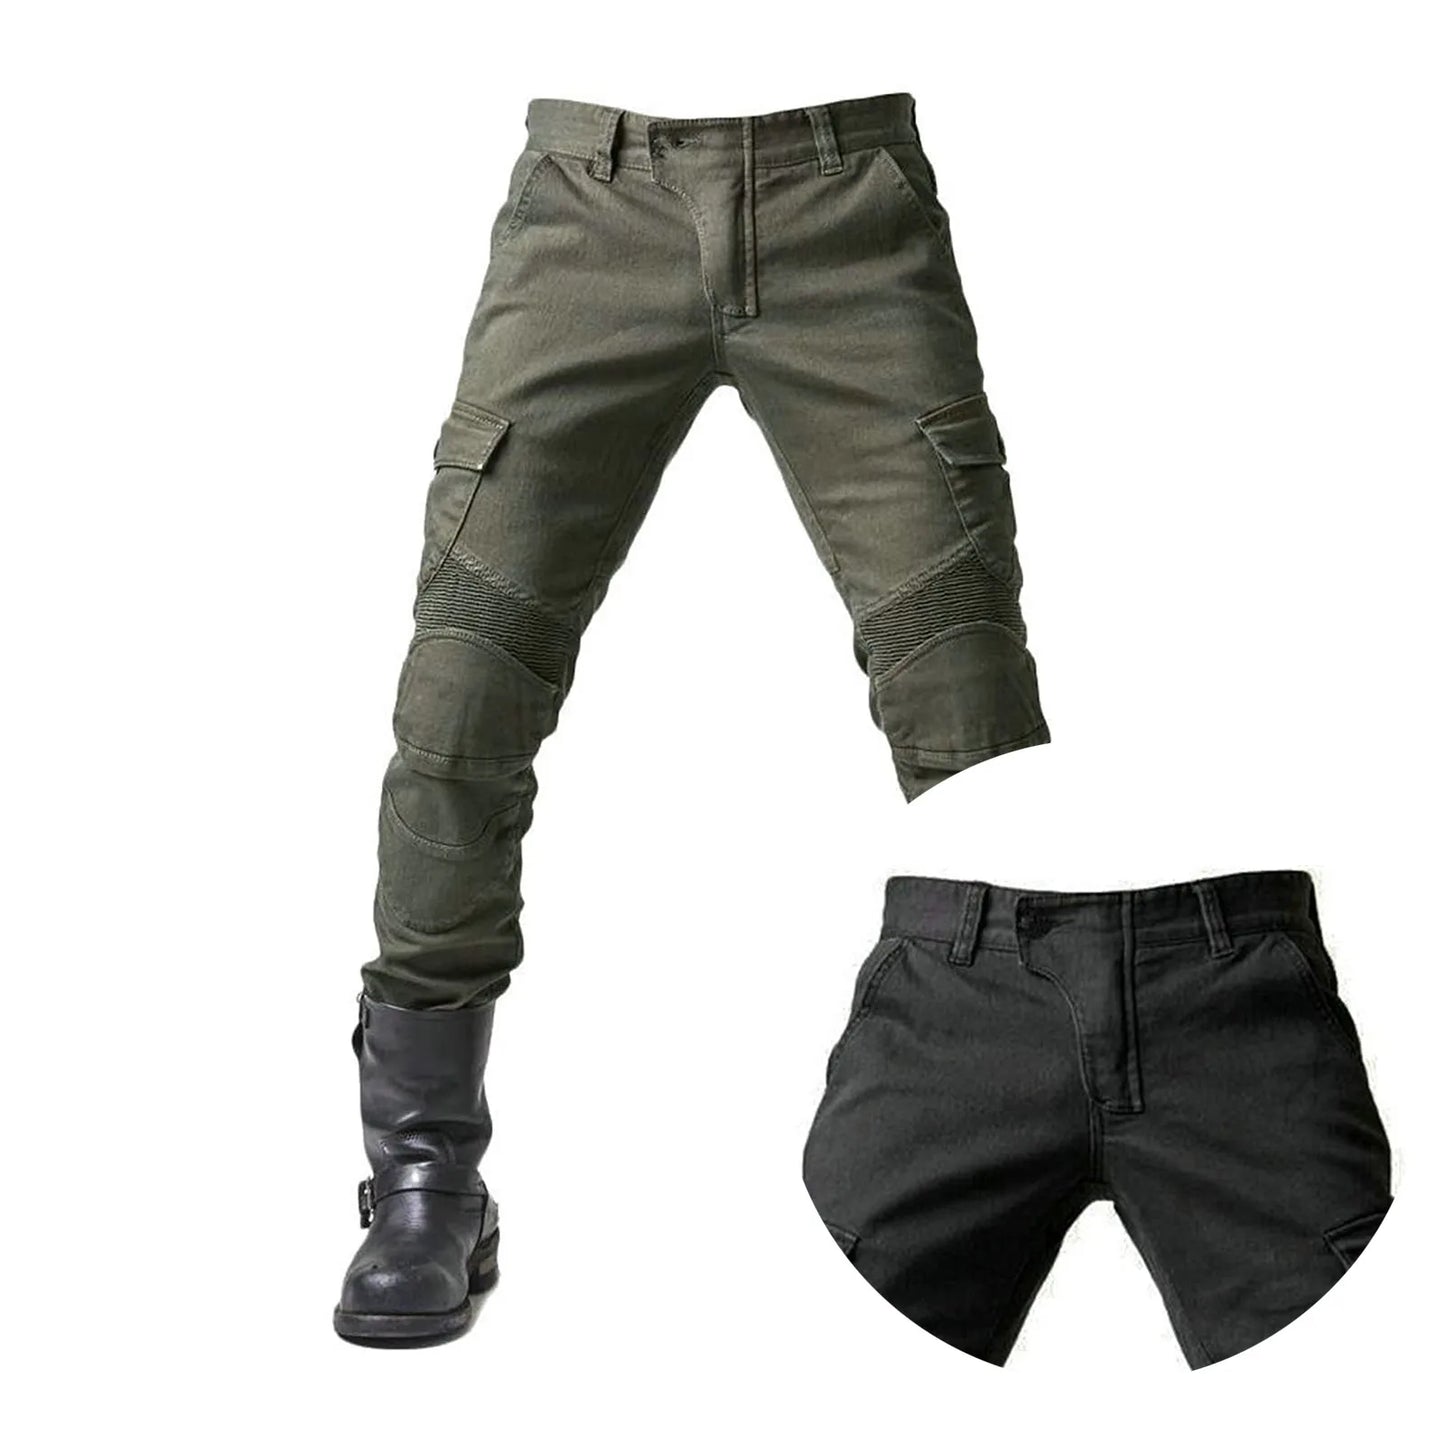 Casual Motorcycle Black Green Jeans Outdoor Riding Gear Pants Warm With Protective Gear Stretch Trousers Knee Pads Removable#g3